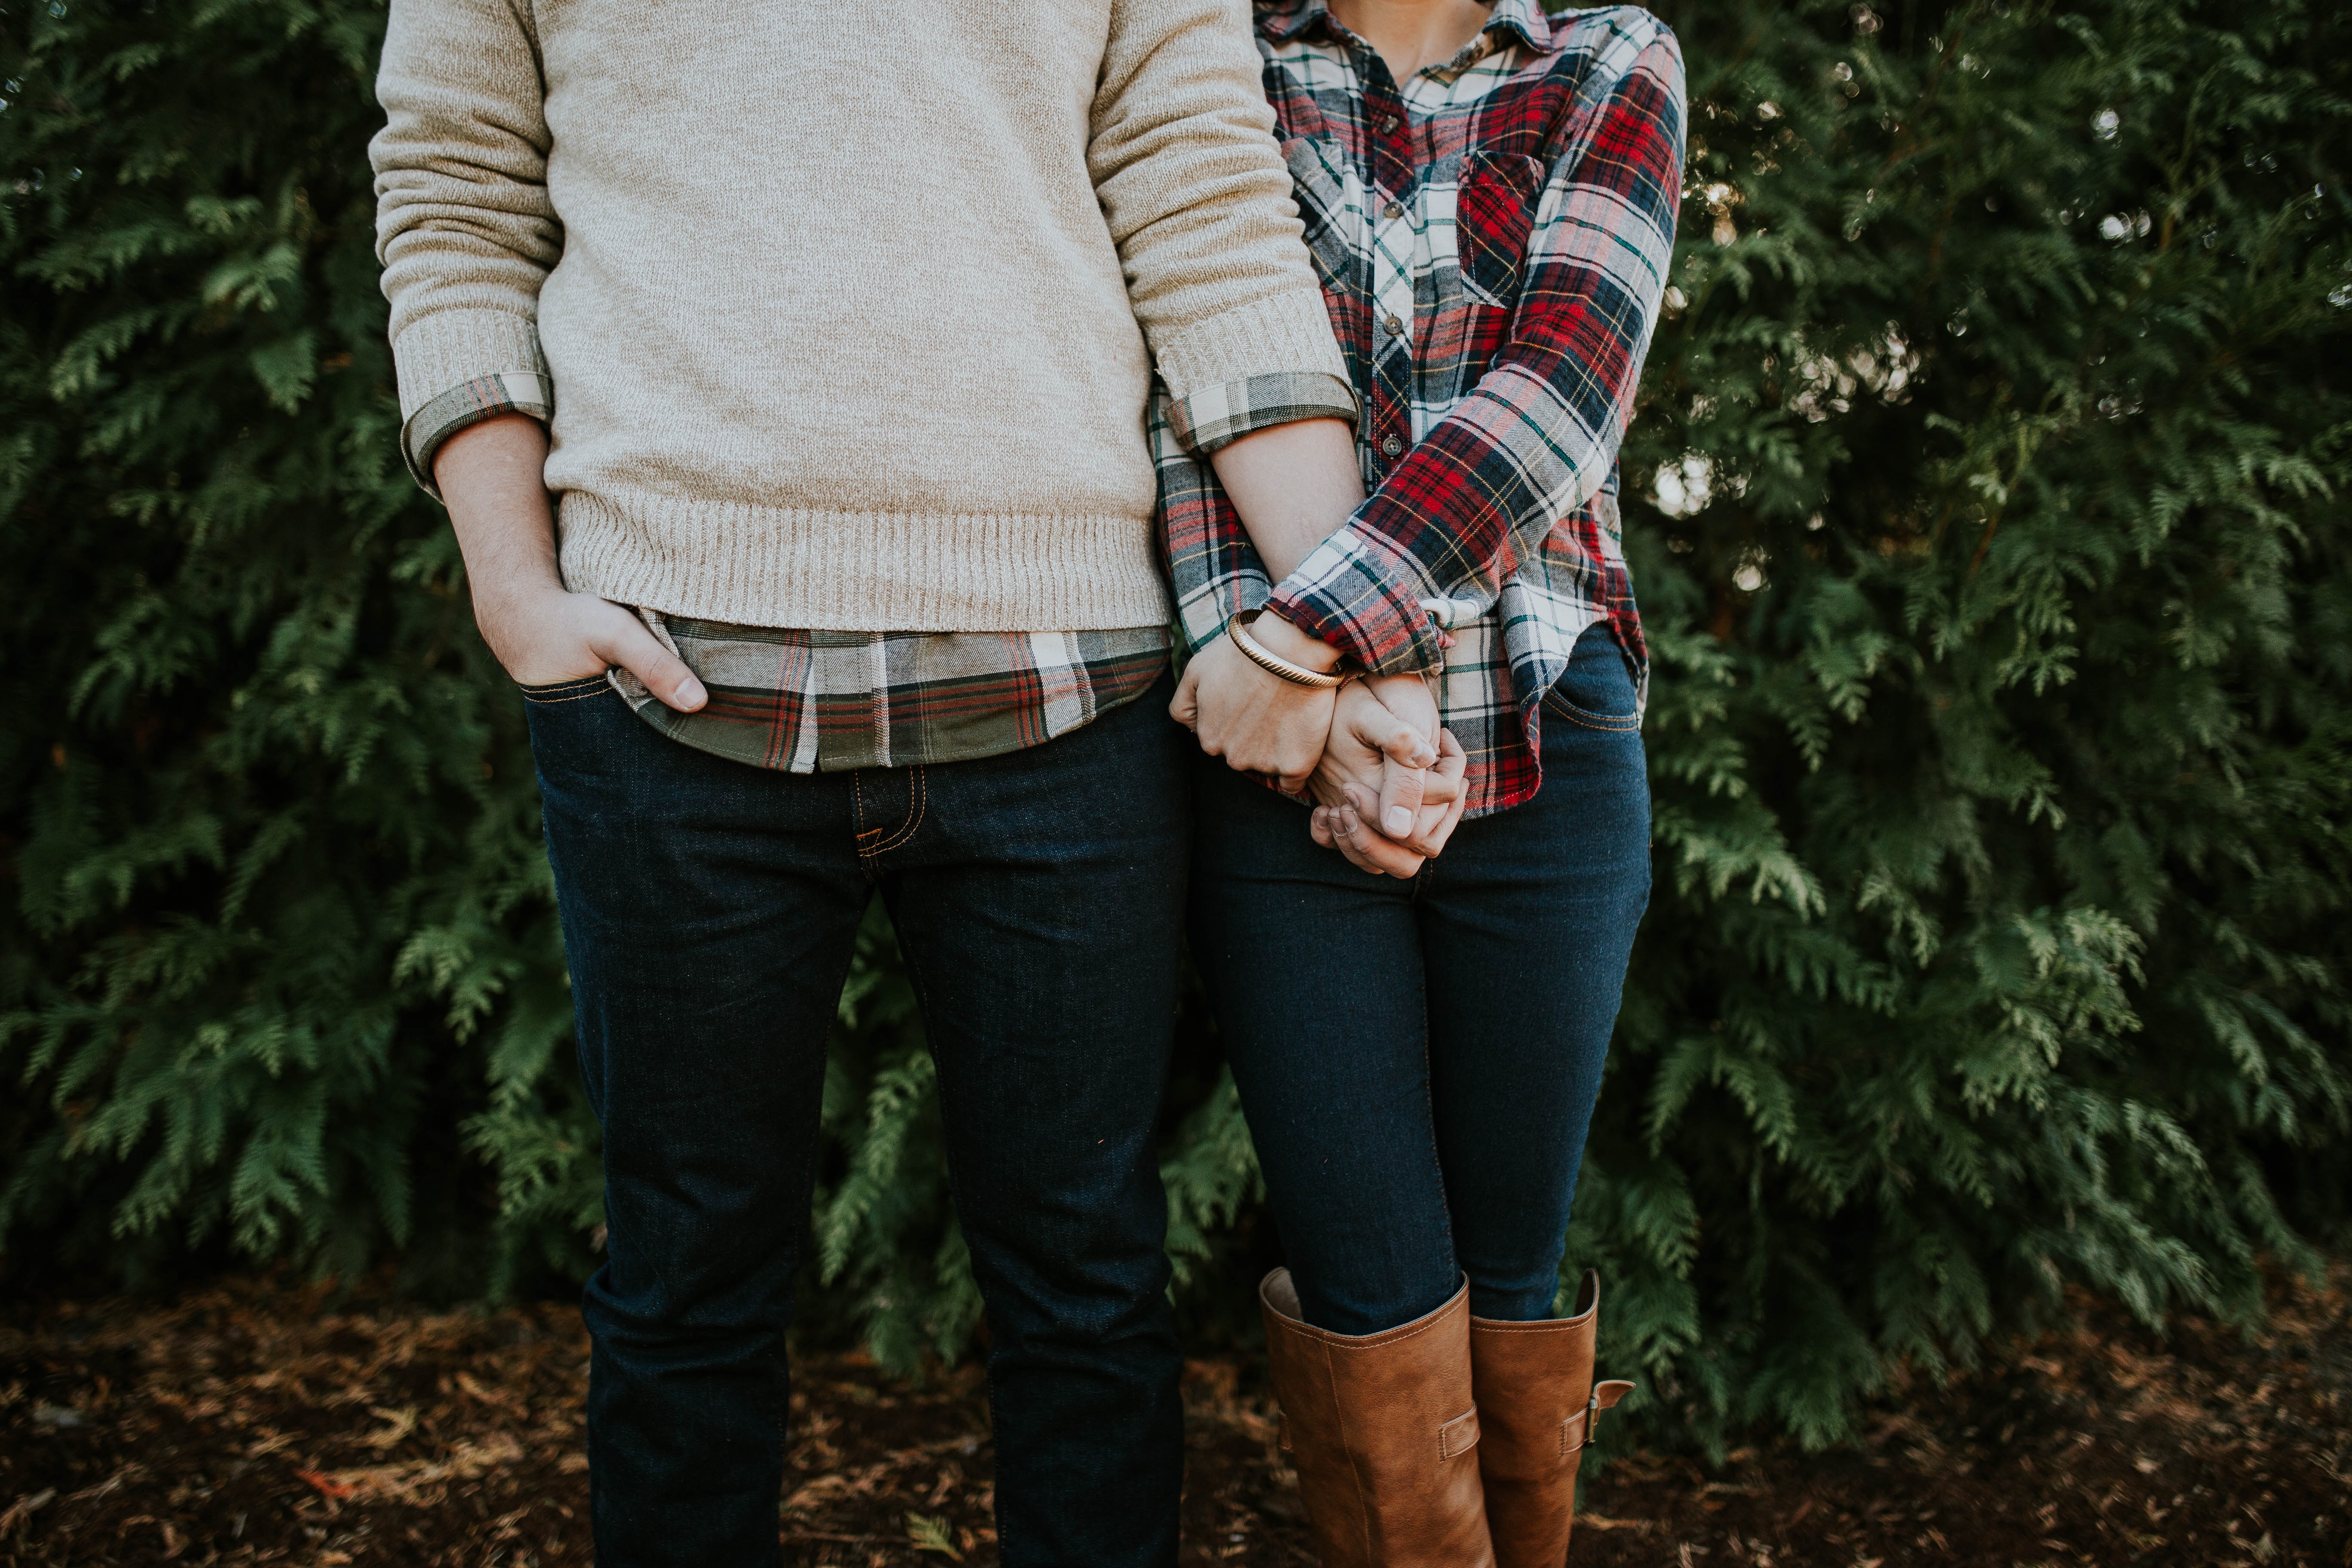 Two people holding hands. | Source: Unsplash